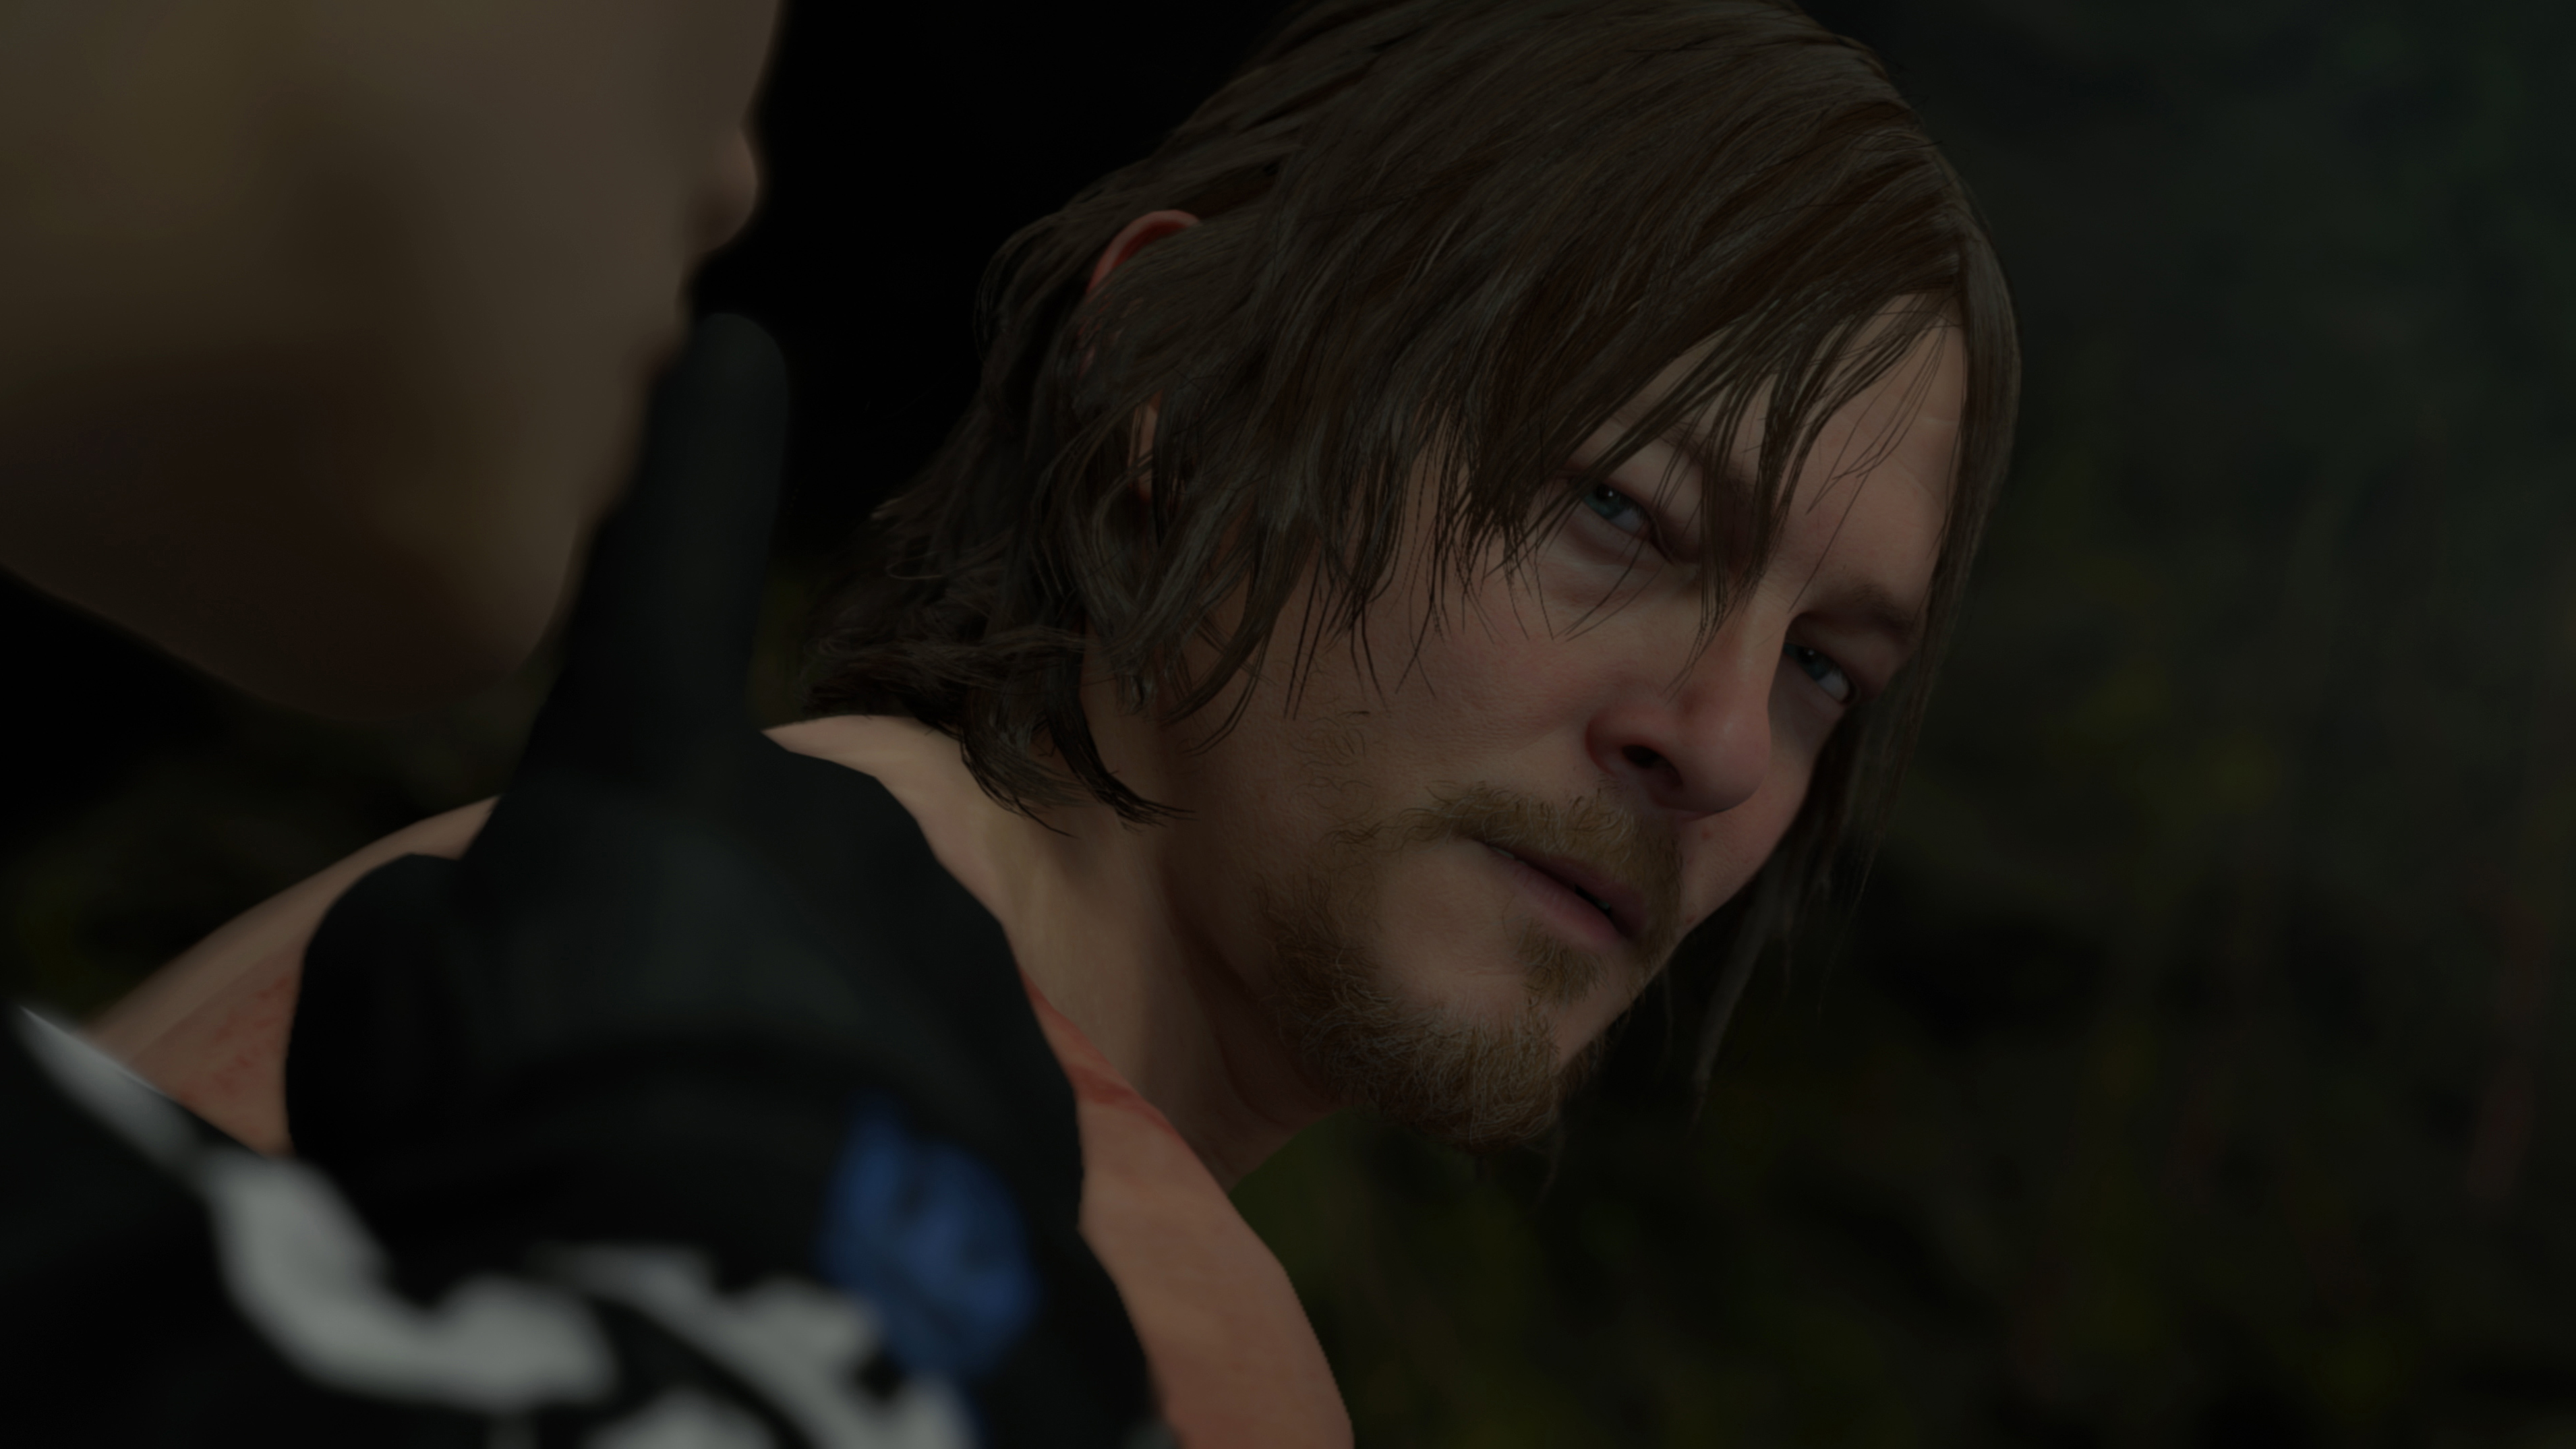 Death Stranding Game Trailer and Release Date Revealed - Death Stranding  Plot Questions